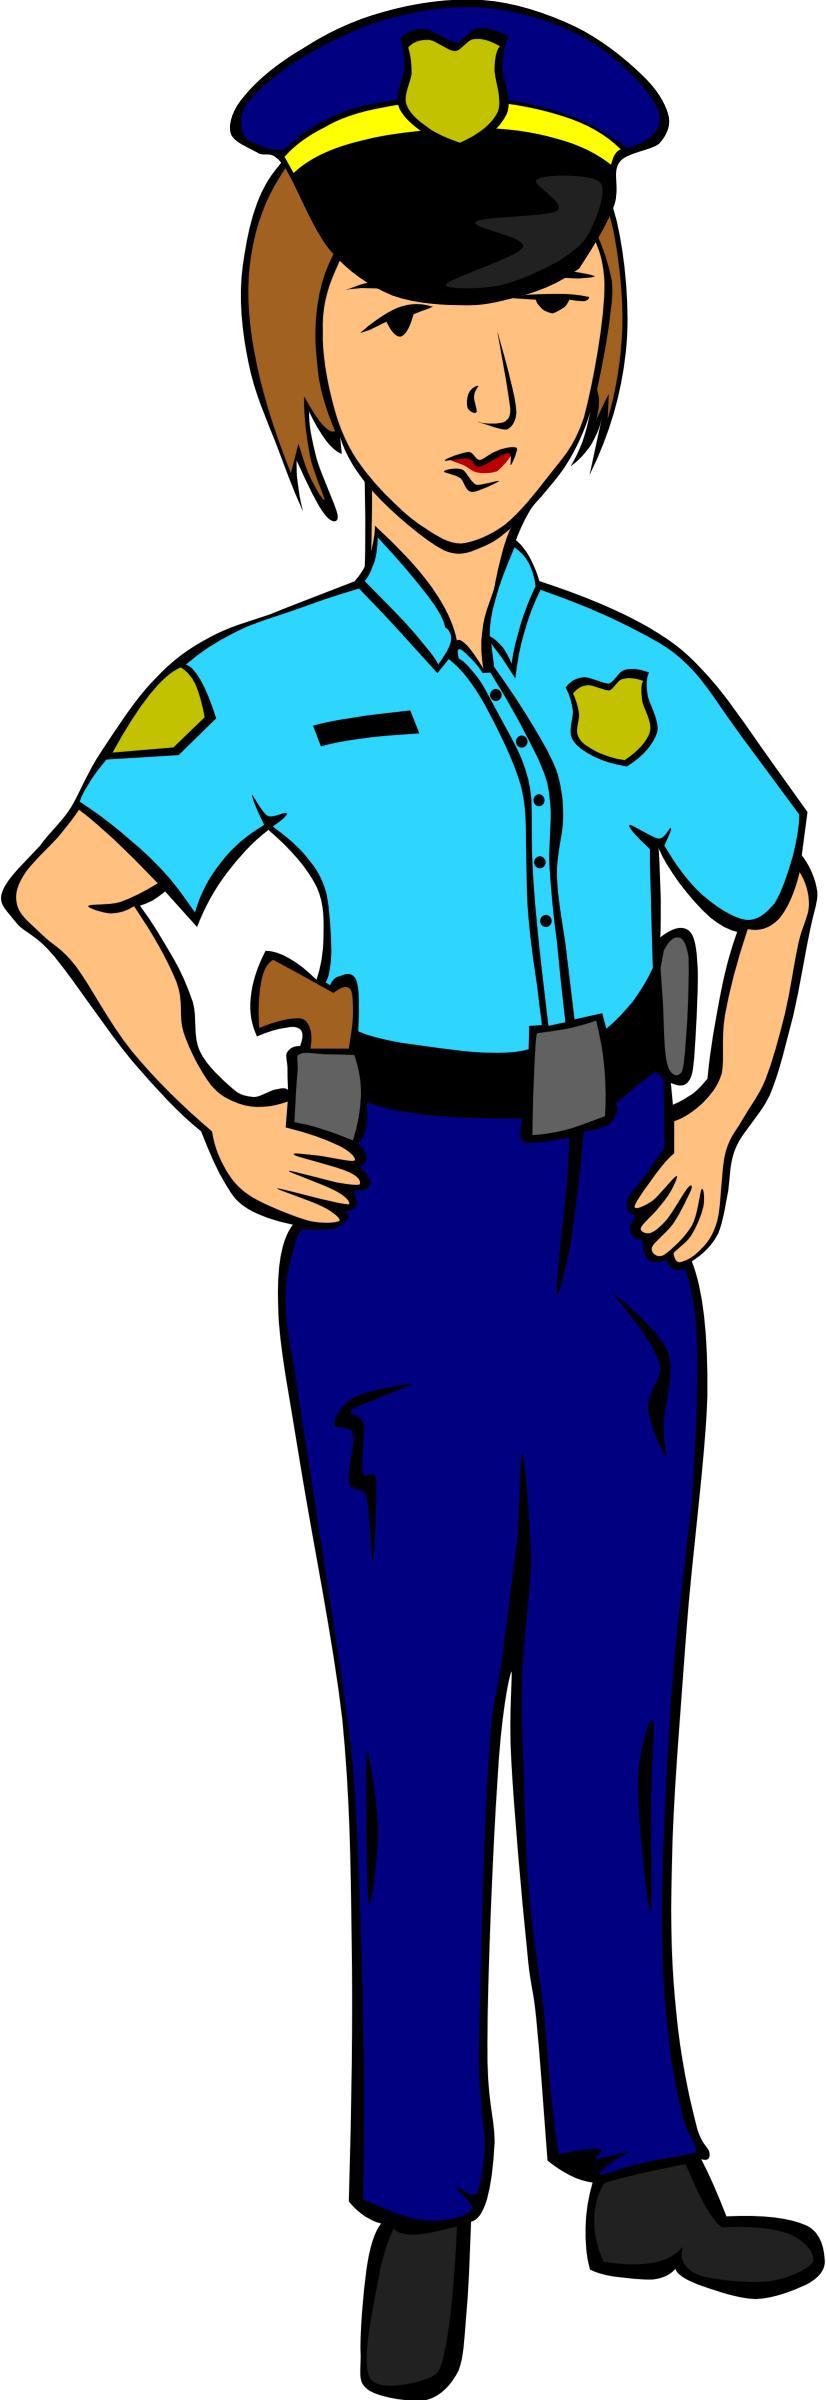 Woman Police Officer png transparent